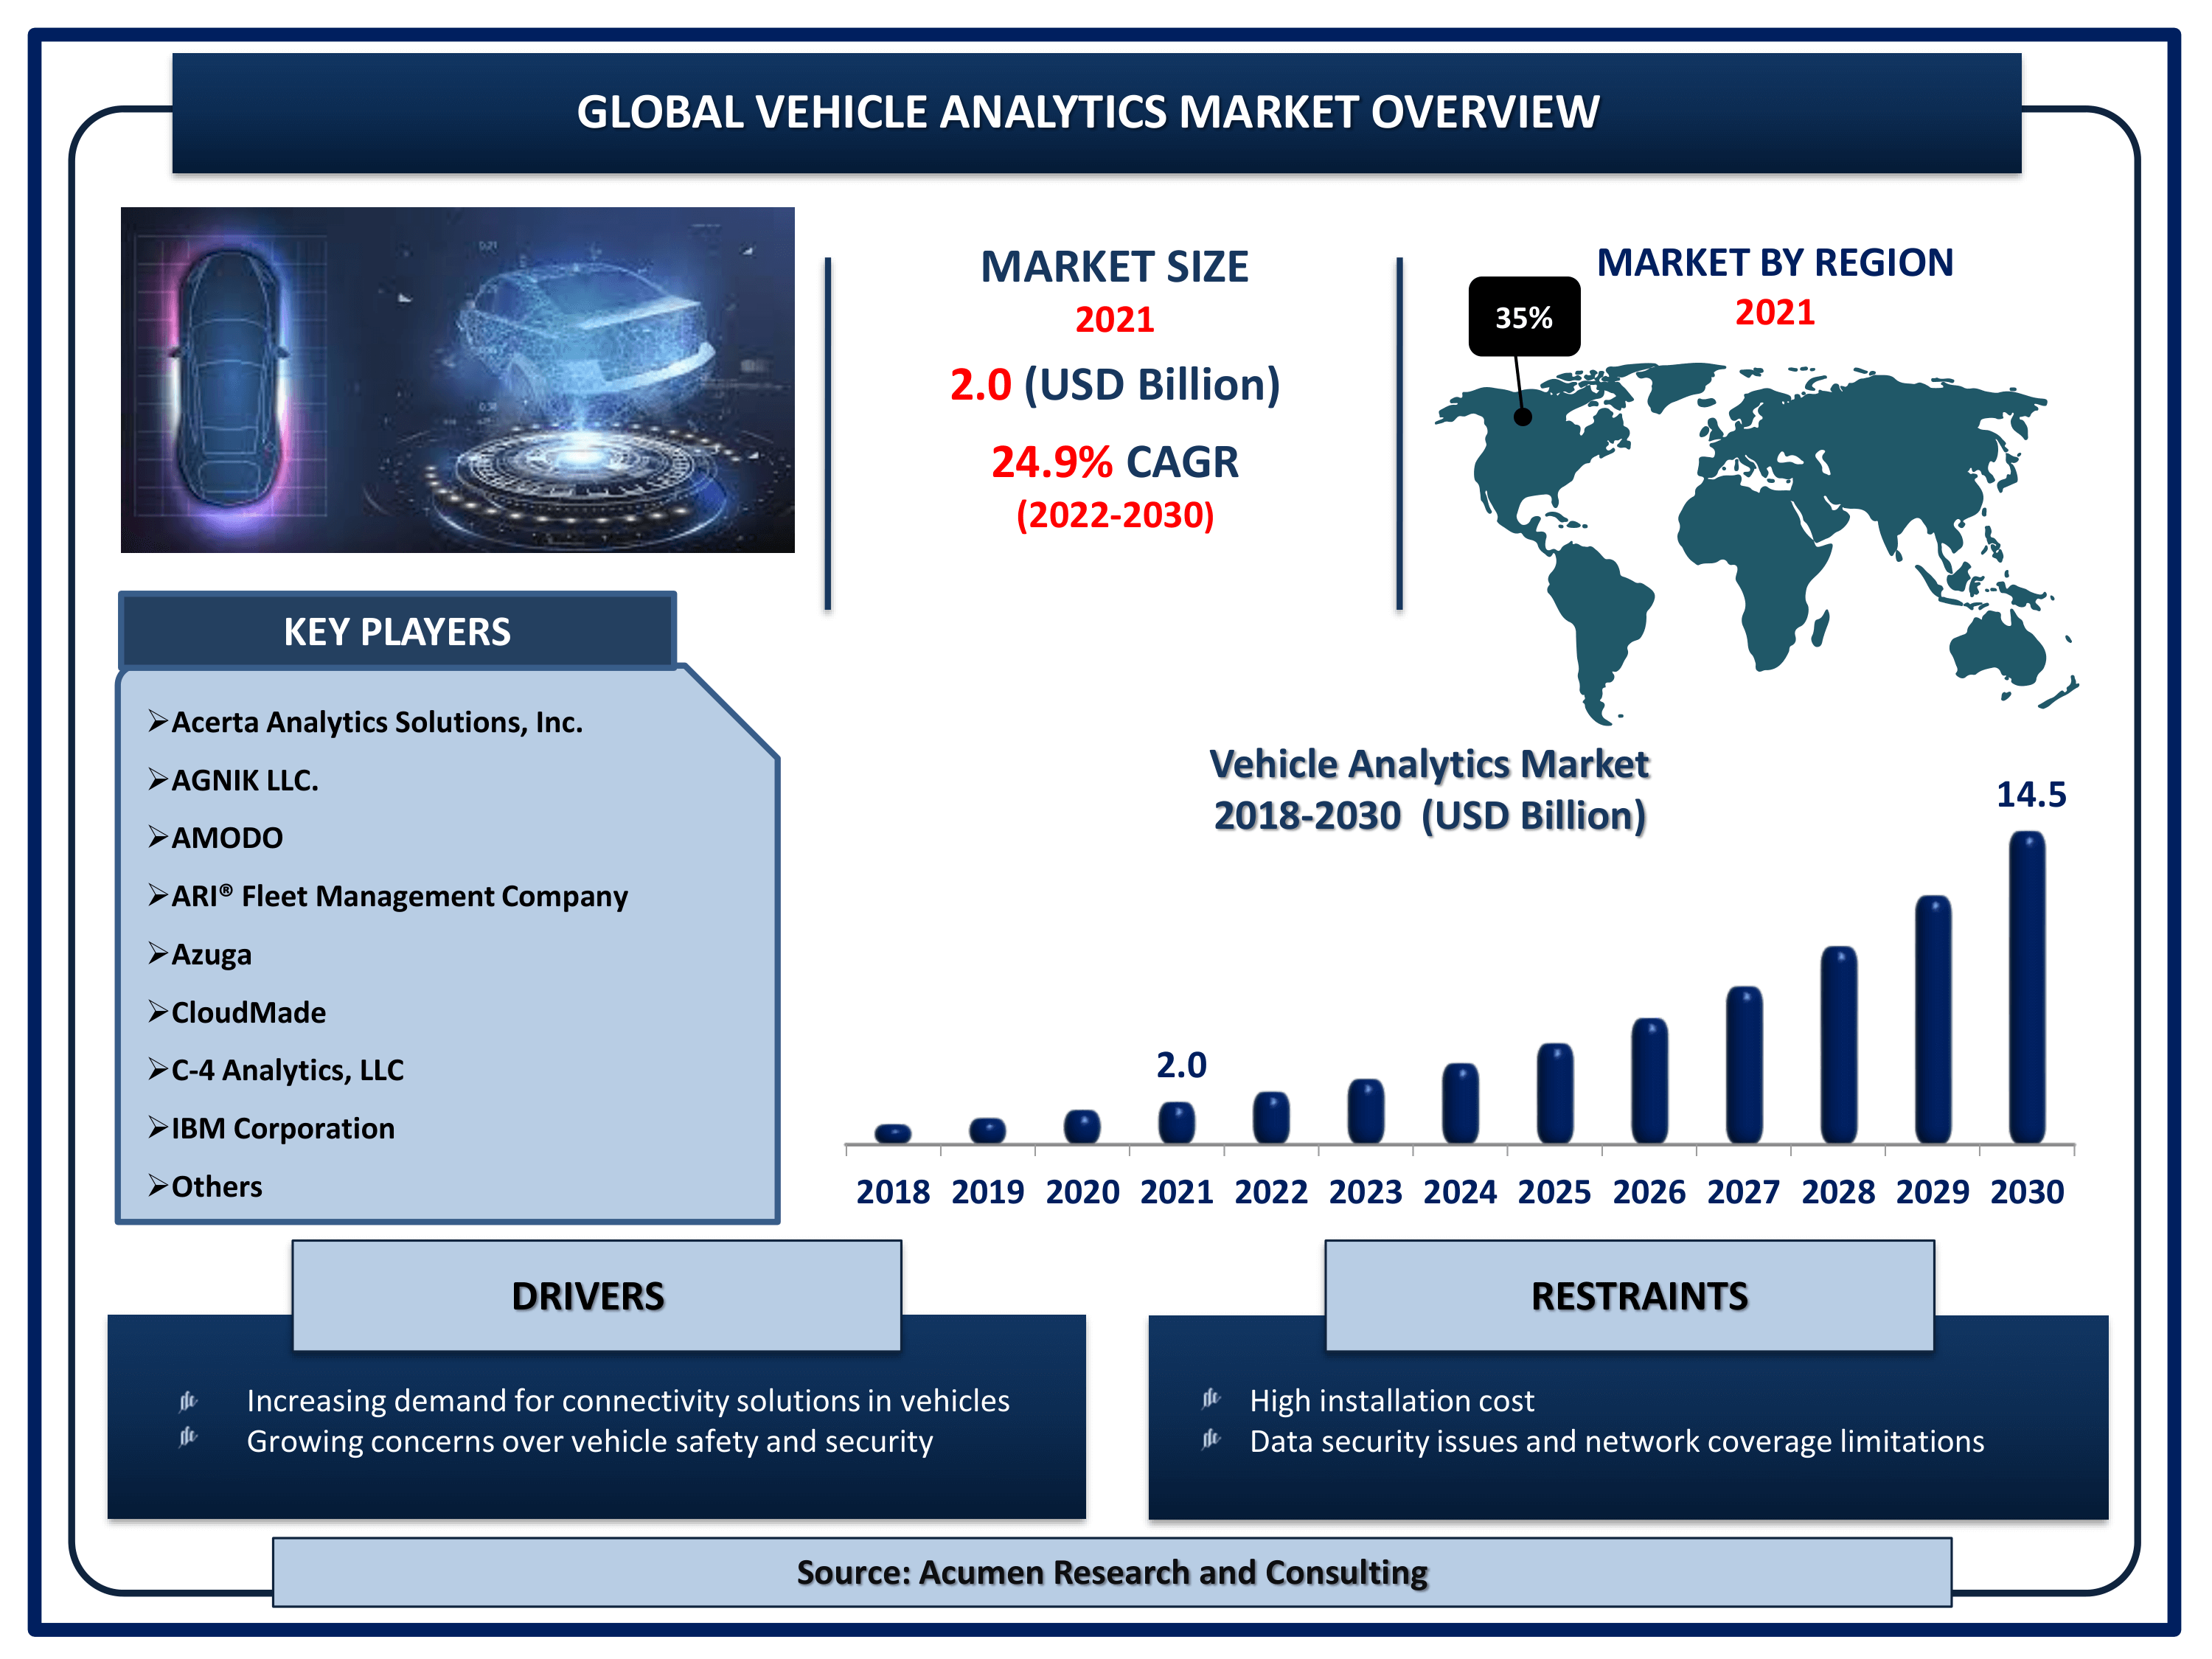 Global vehicle analytics market revenue is estimated to reach USD 14.5 Billion by 2030 with a CAGR of 24.9% from 2022 to 2030